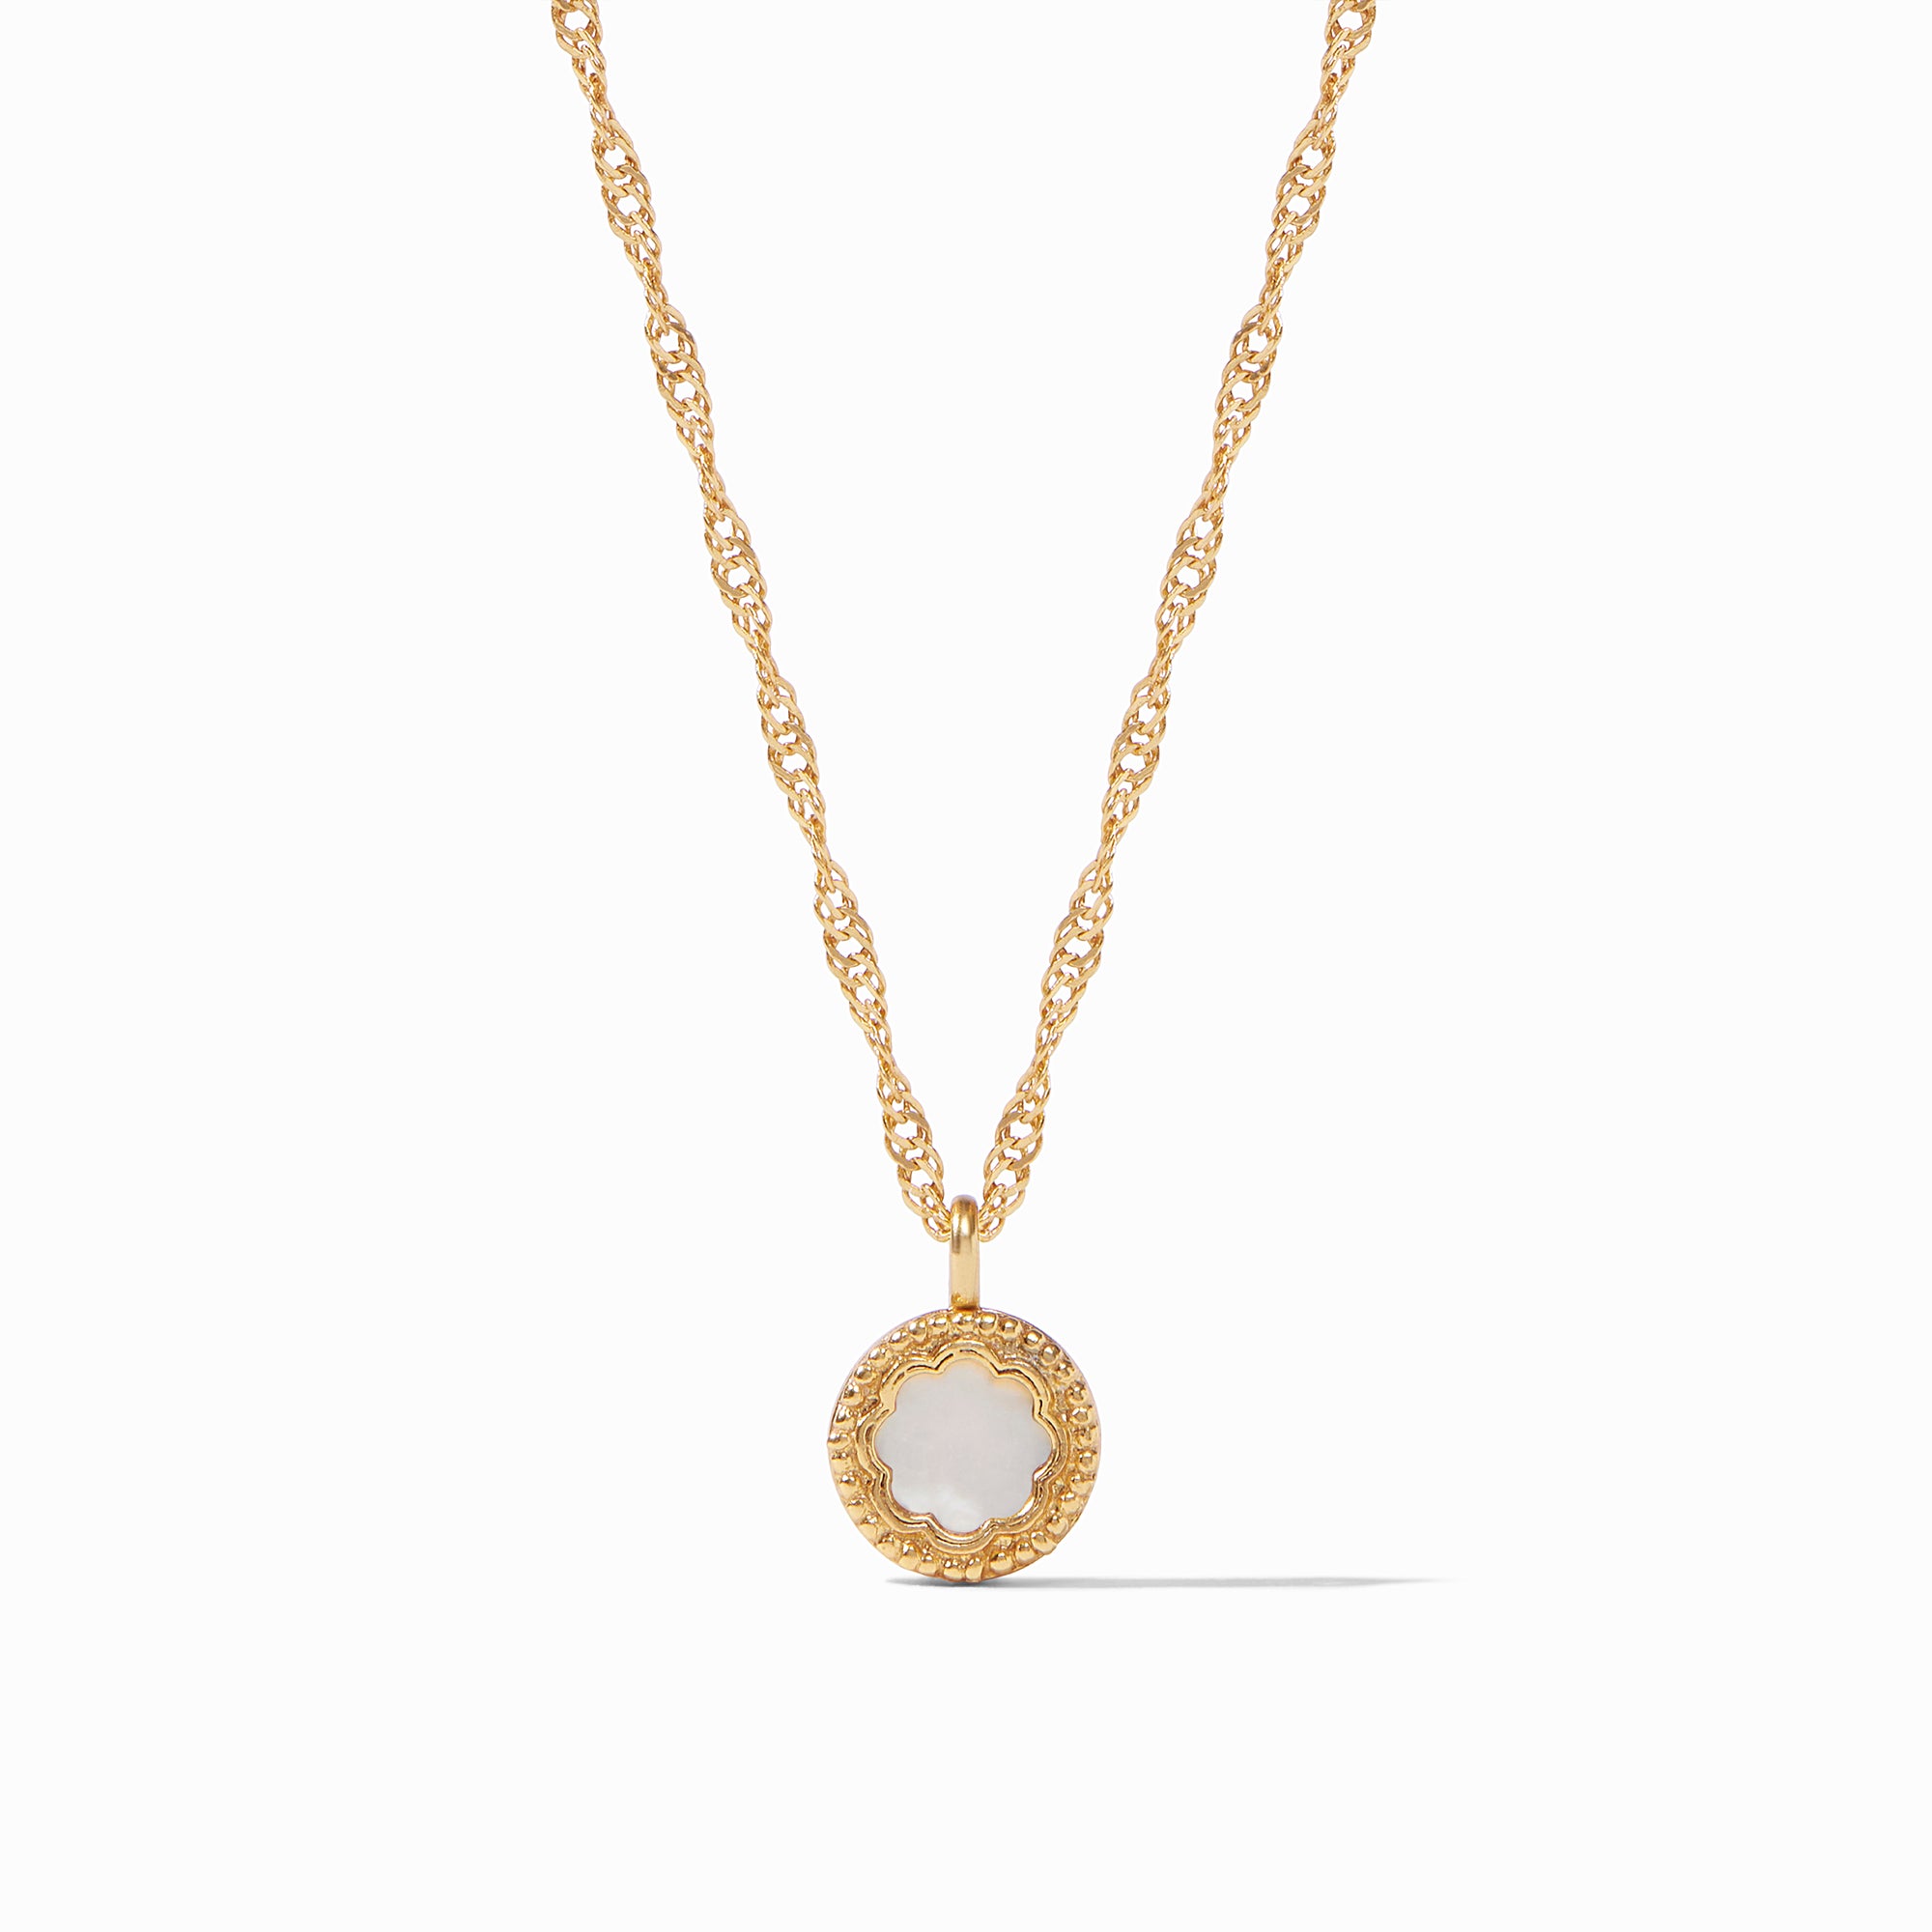 Julie Vos - Trieste Demi Coin Solitaire Necklace, Mother of Pearl